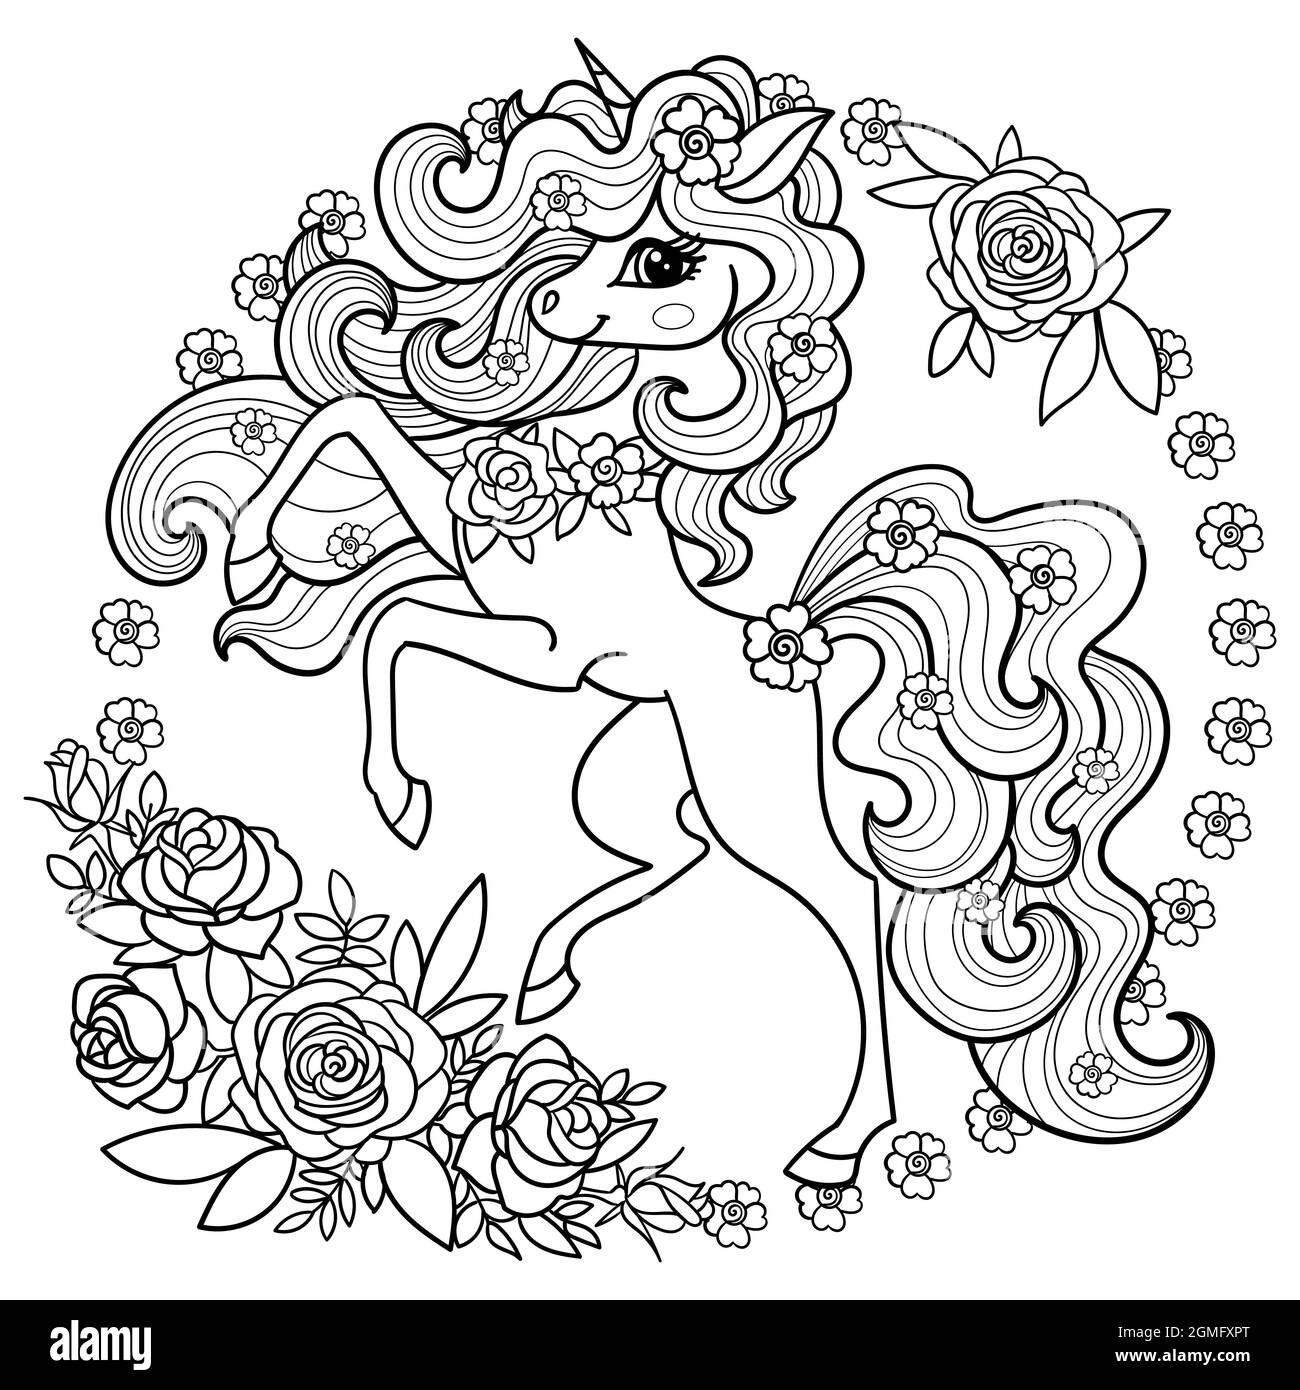 Unicorns with big horn, flowers and leaves. Cute portrait of a unicorn with  a beautiful rainbow mane. 